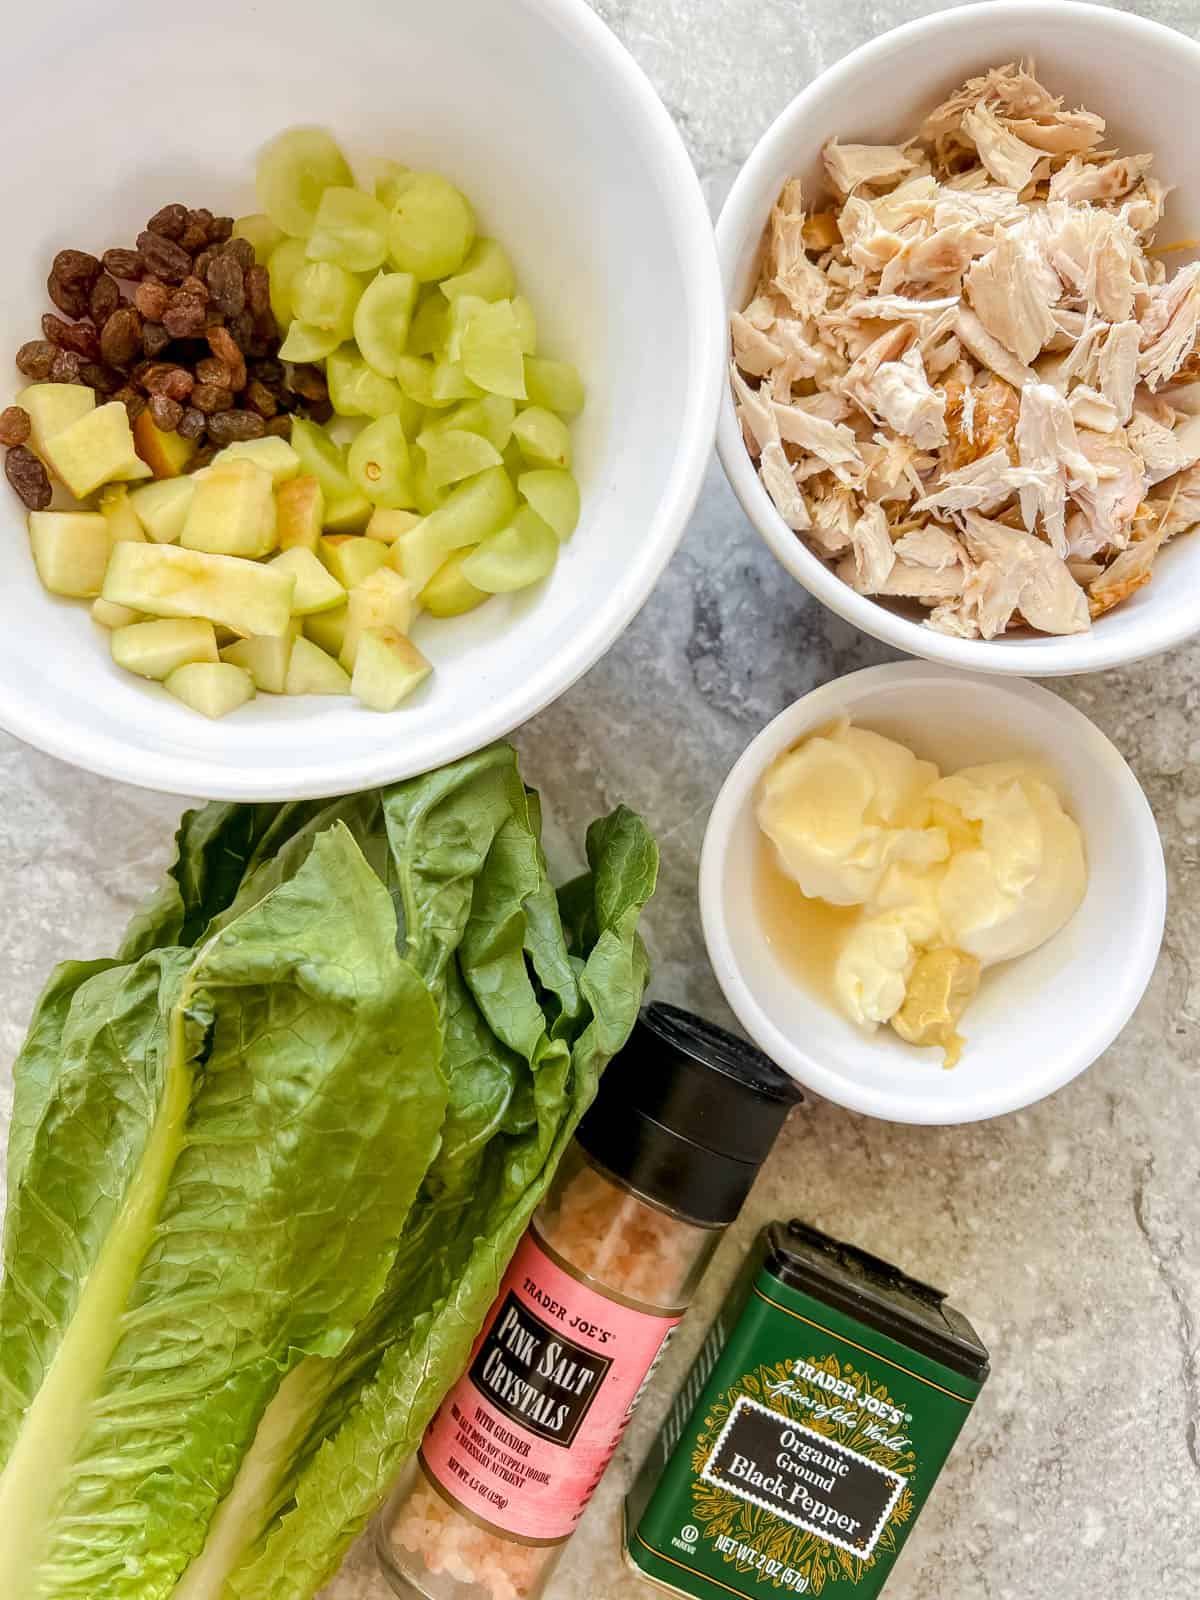 Chicken salad lettuce wraps ingredients on a table.